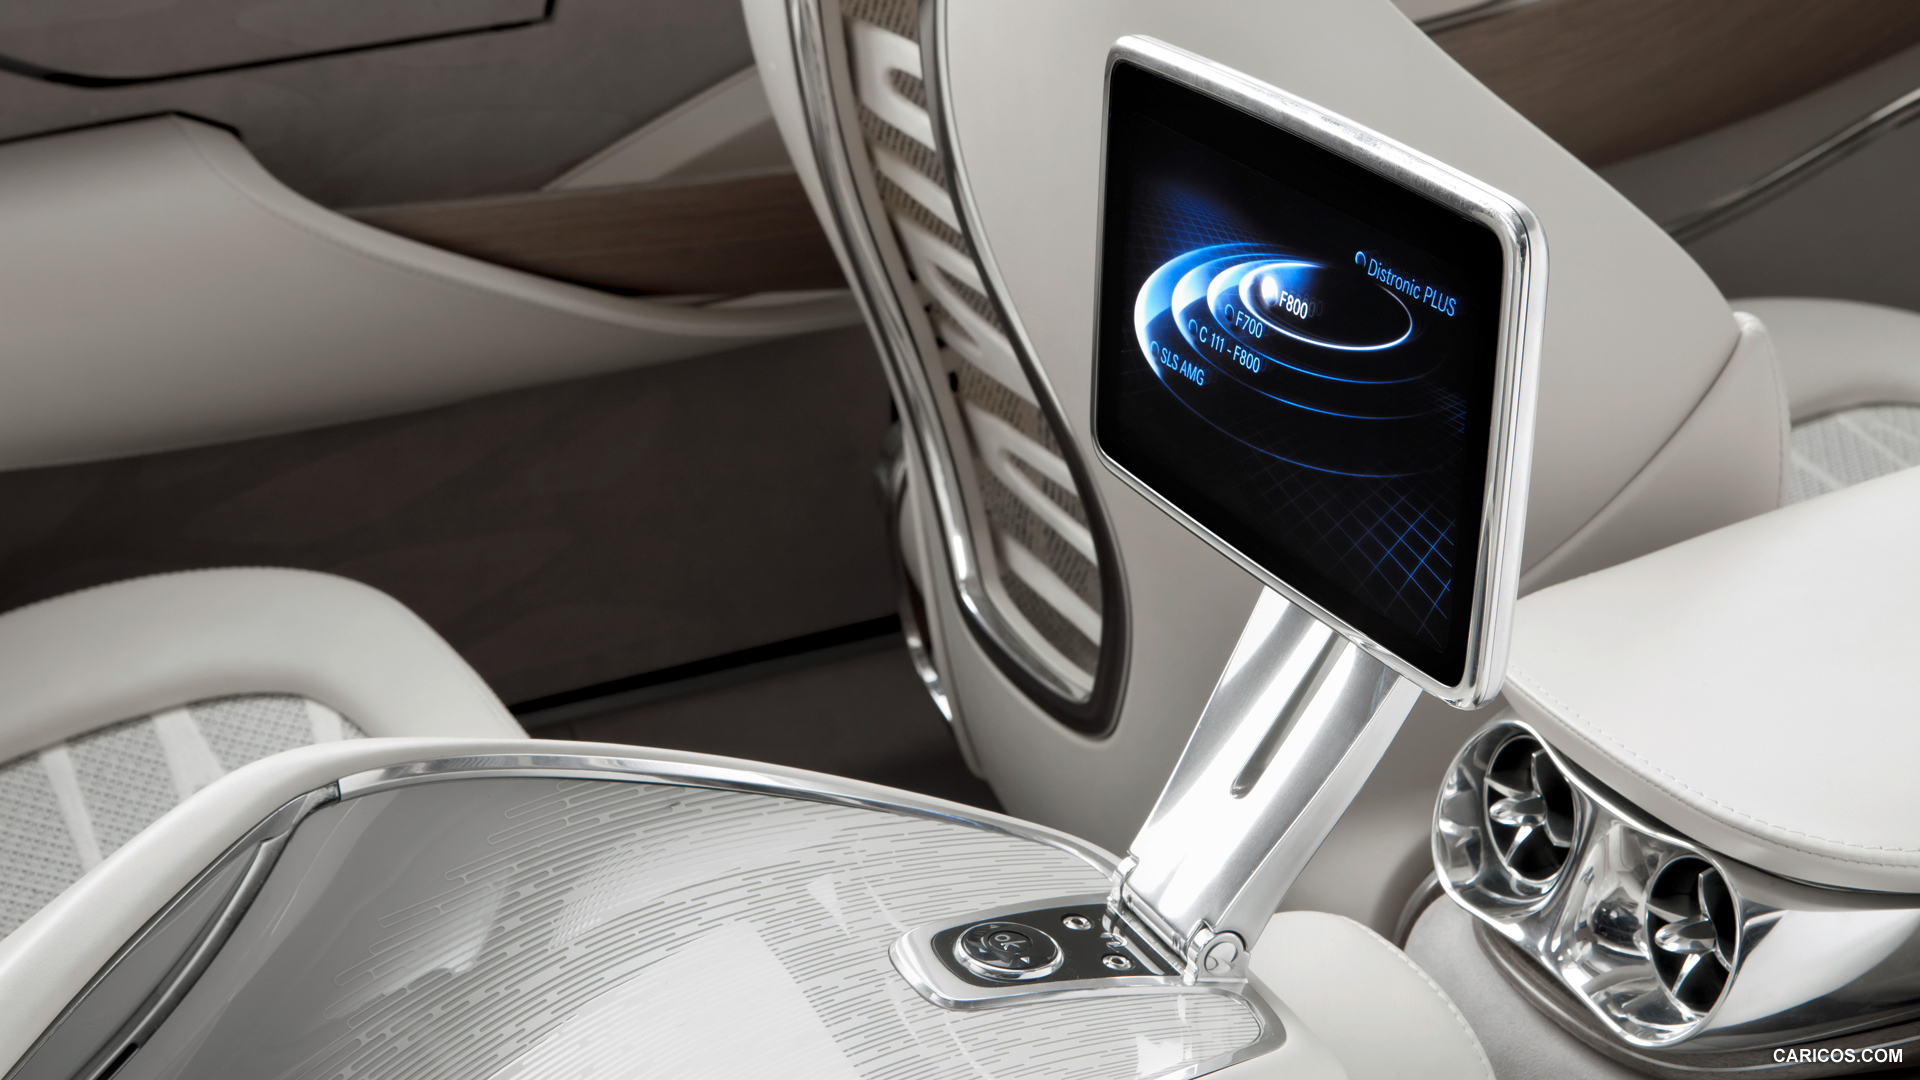 Mercedes-Benz F800 Style Concept (2010)  - Interior, Close-up, #64 of 120